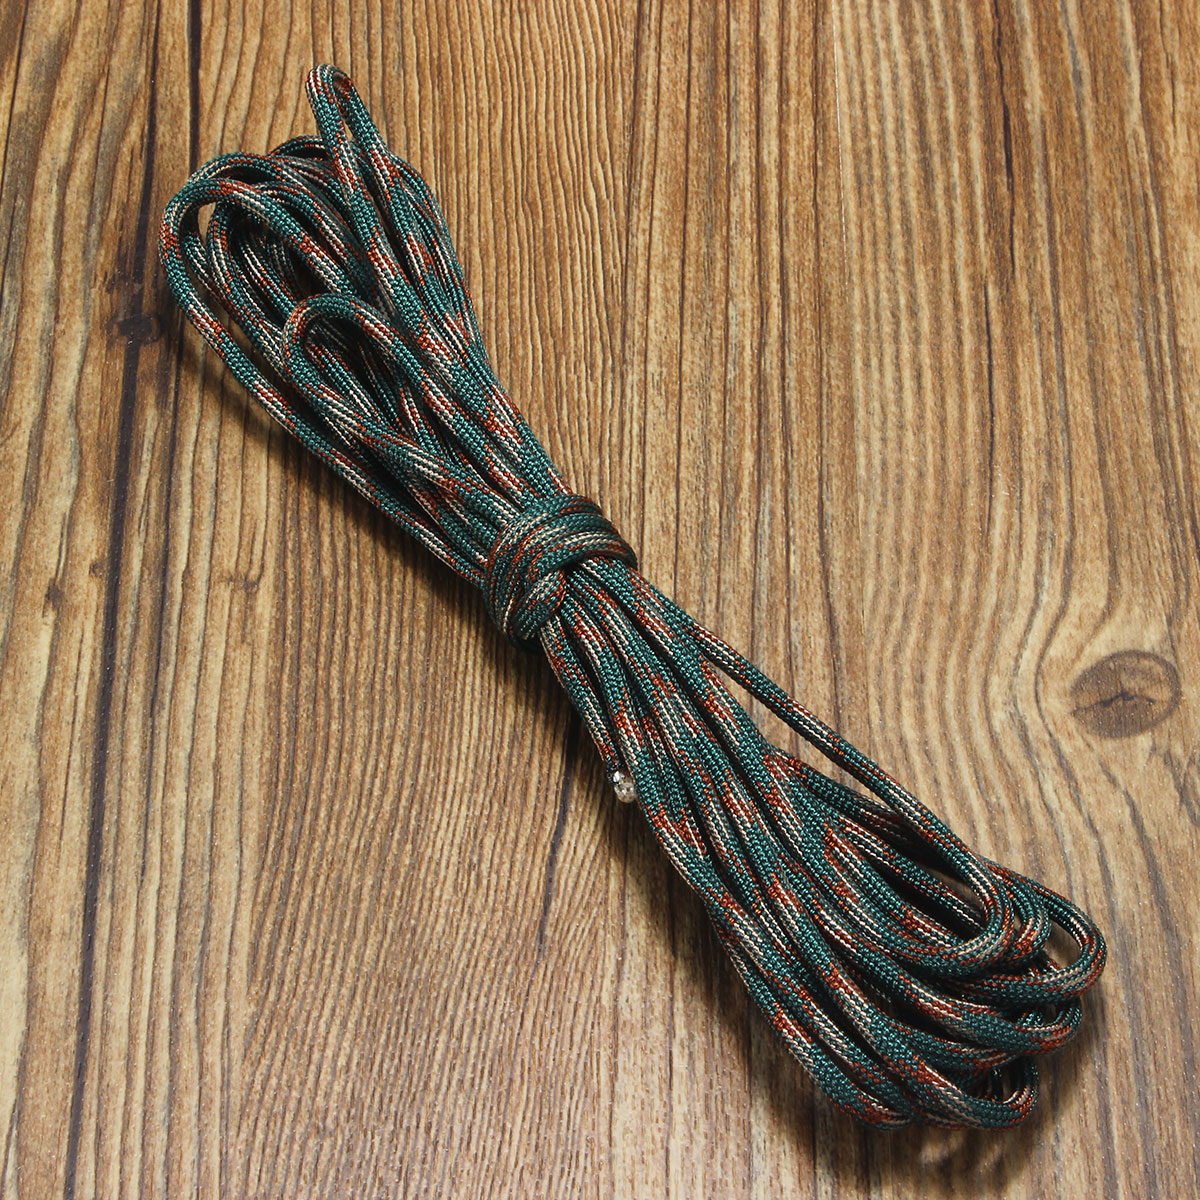 15ft-5m-7-Inner-Strand-505-550-Mil-Survival-Paracord-Bushcraft-Survival-Cord-Lanyard-Rope-Type-III-1349688-5